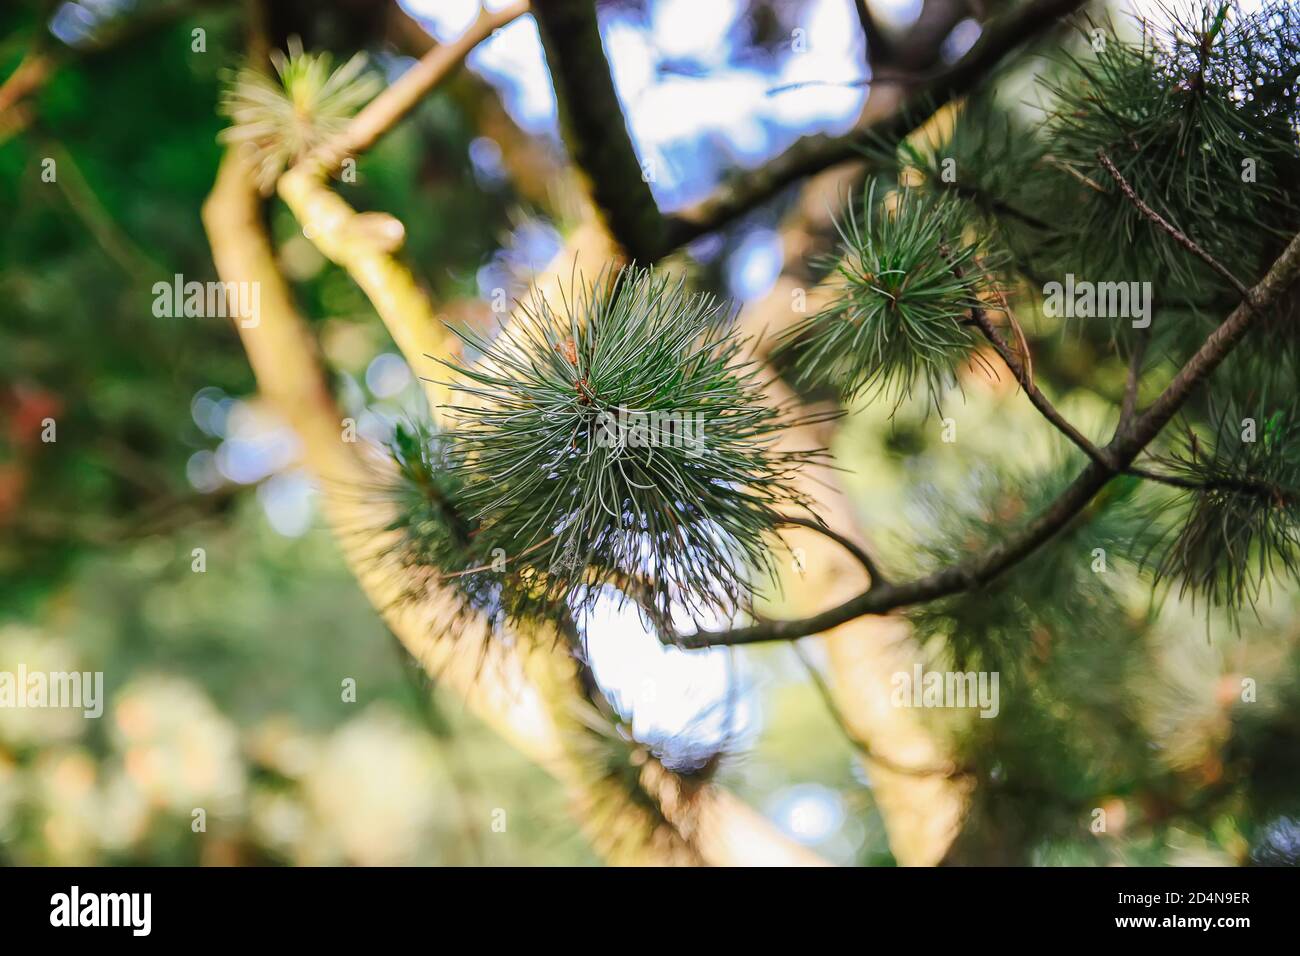 Green prickly branches of pine tree Stock Photo